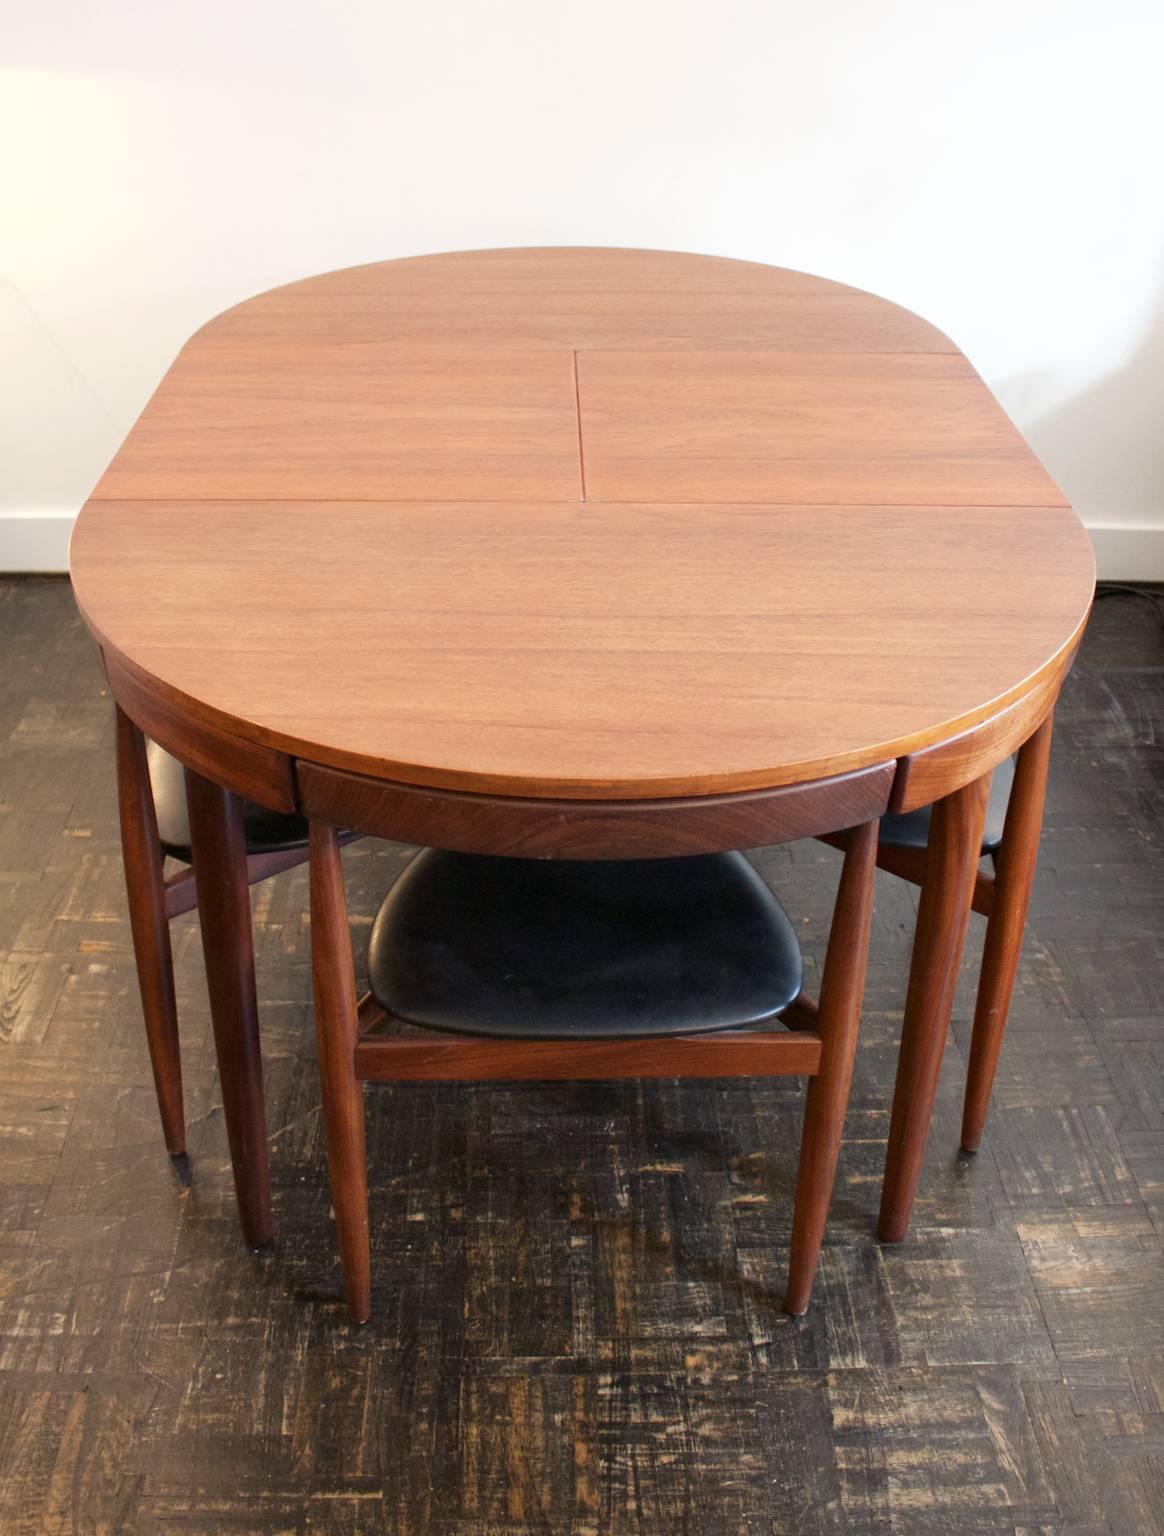 Dining set by Hans Olsen for Frem Rojle of Denmark comprising extending dining table and four three-legged chairs.

A very nice combination of stylish and practical design. The circular teak table top extends through a hidden butterfly leaf. The